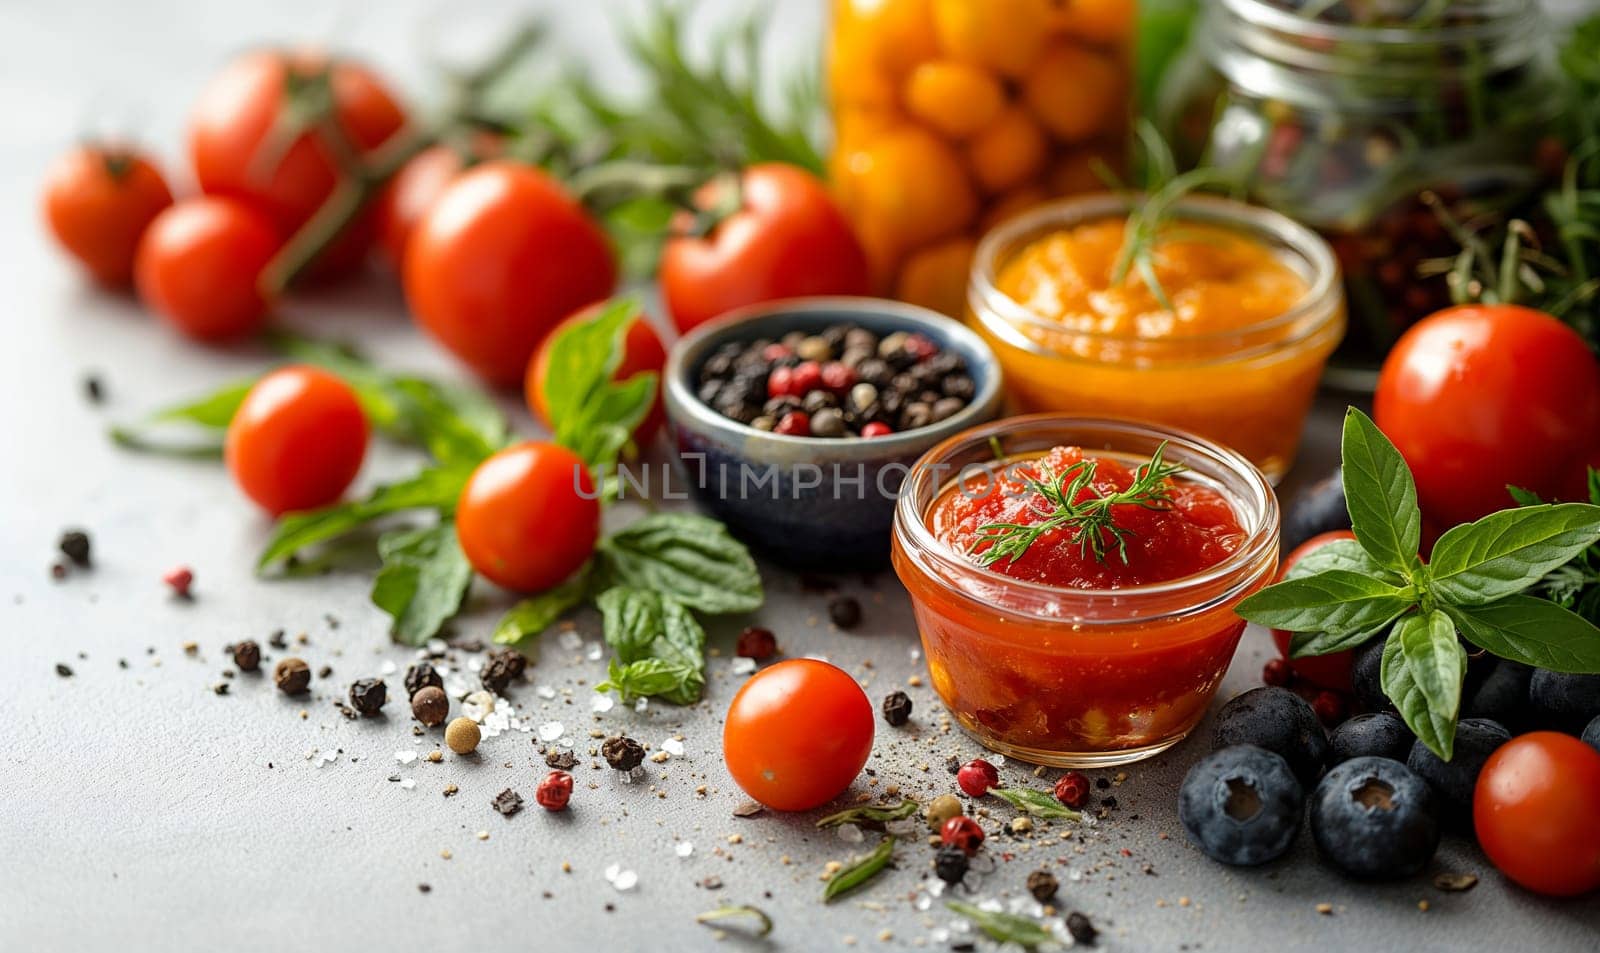 Food background with spices, herbs, sauces and vegetables on a white background.